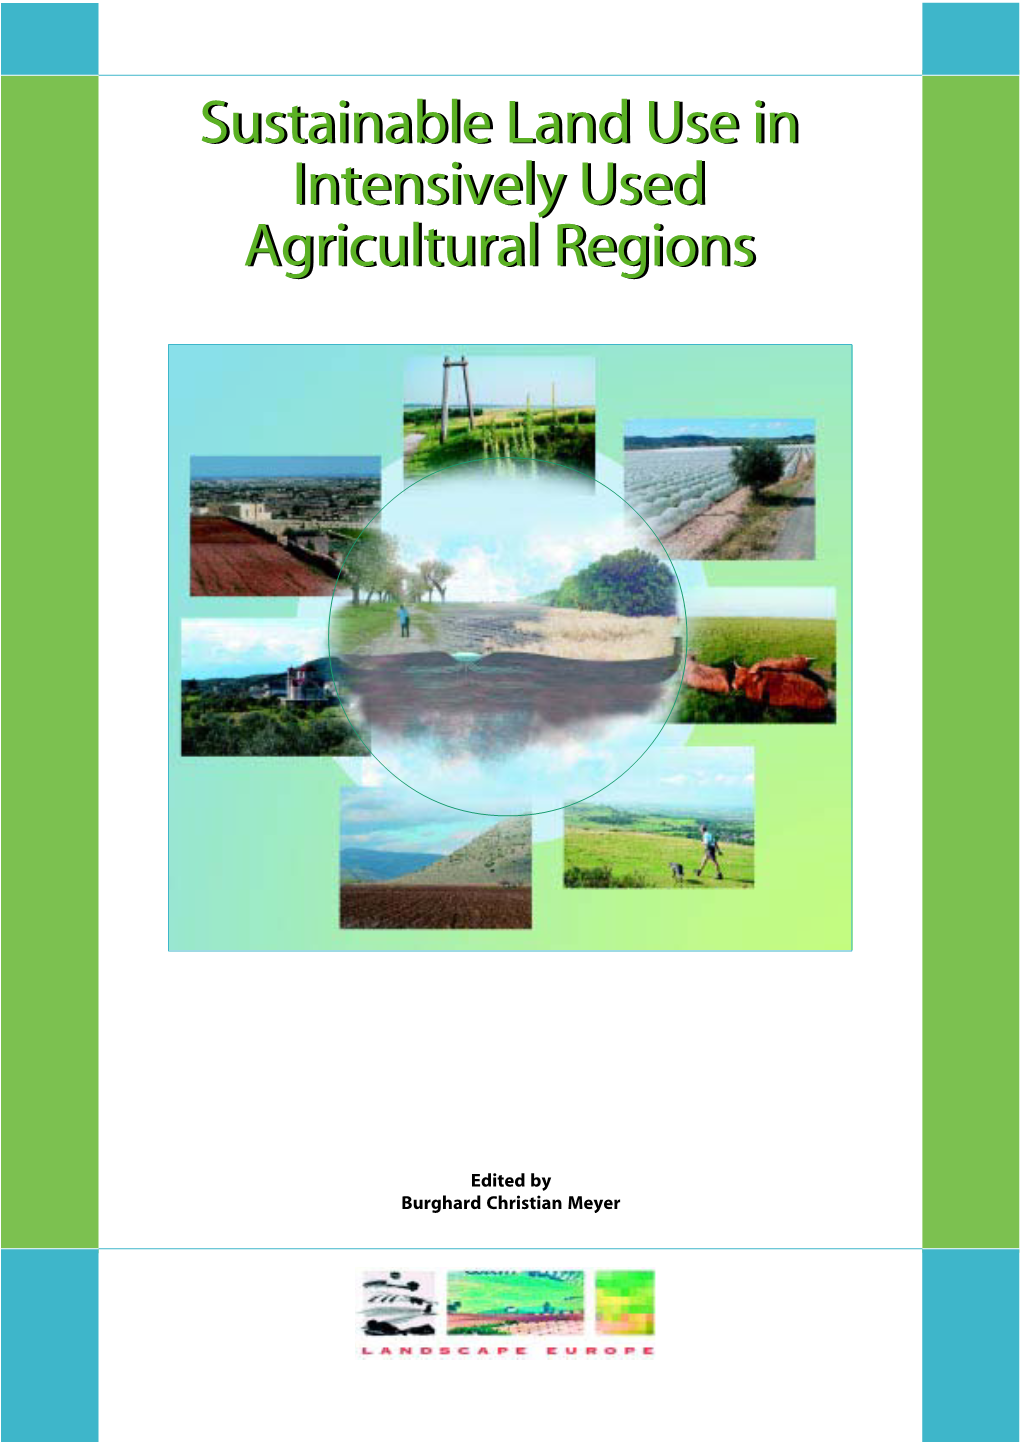 Sustainable Land Use in Intensively Used Agricultural Regions